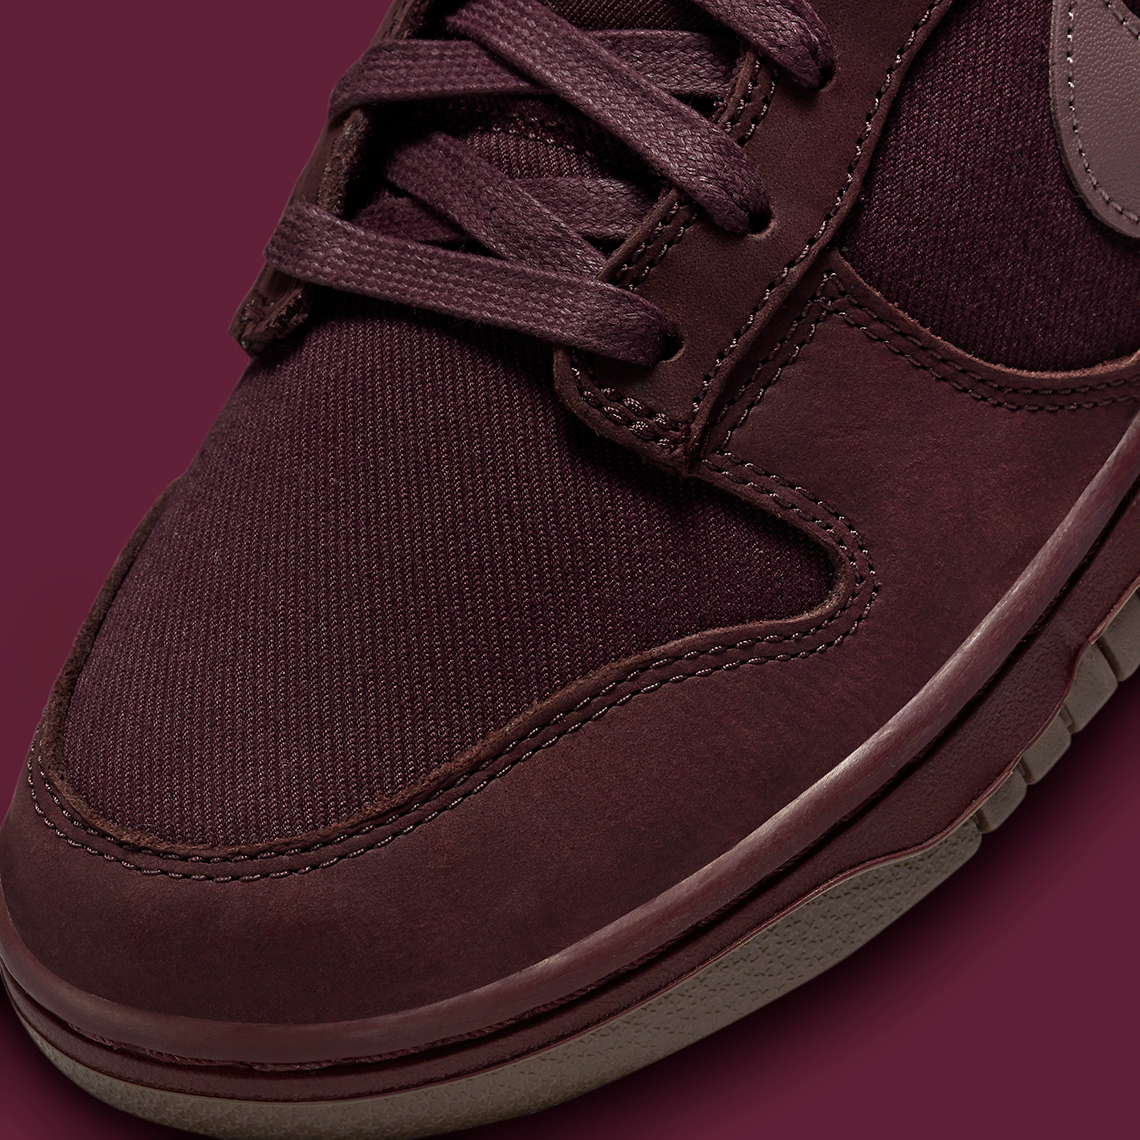 cheap nike snow shoes on sale boots clearance code Burgundy Crush Fb8895 600 3